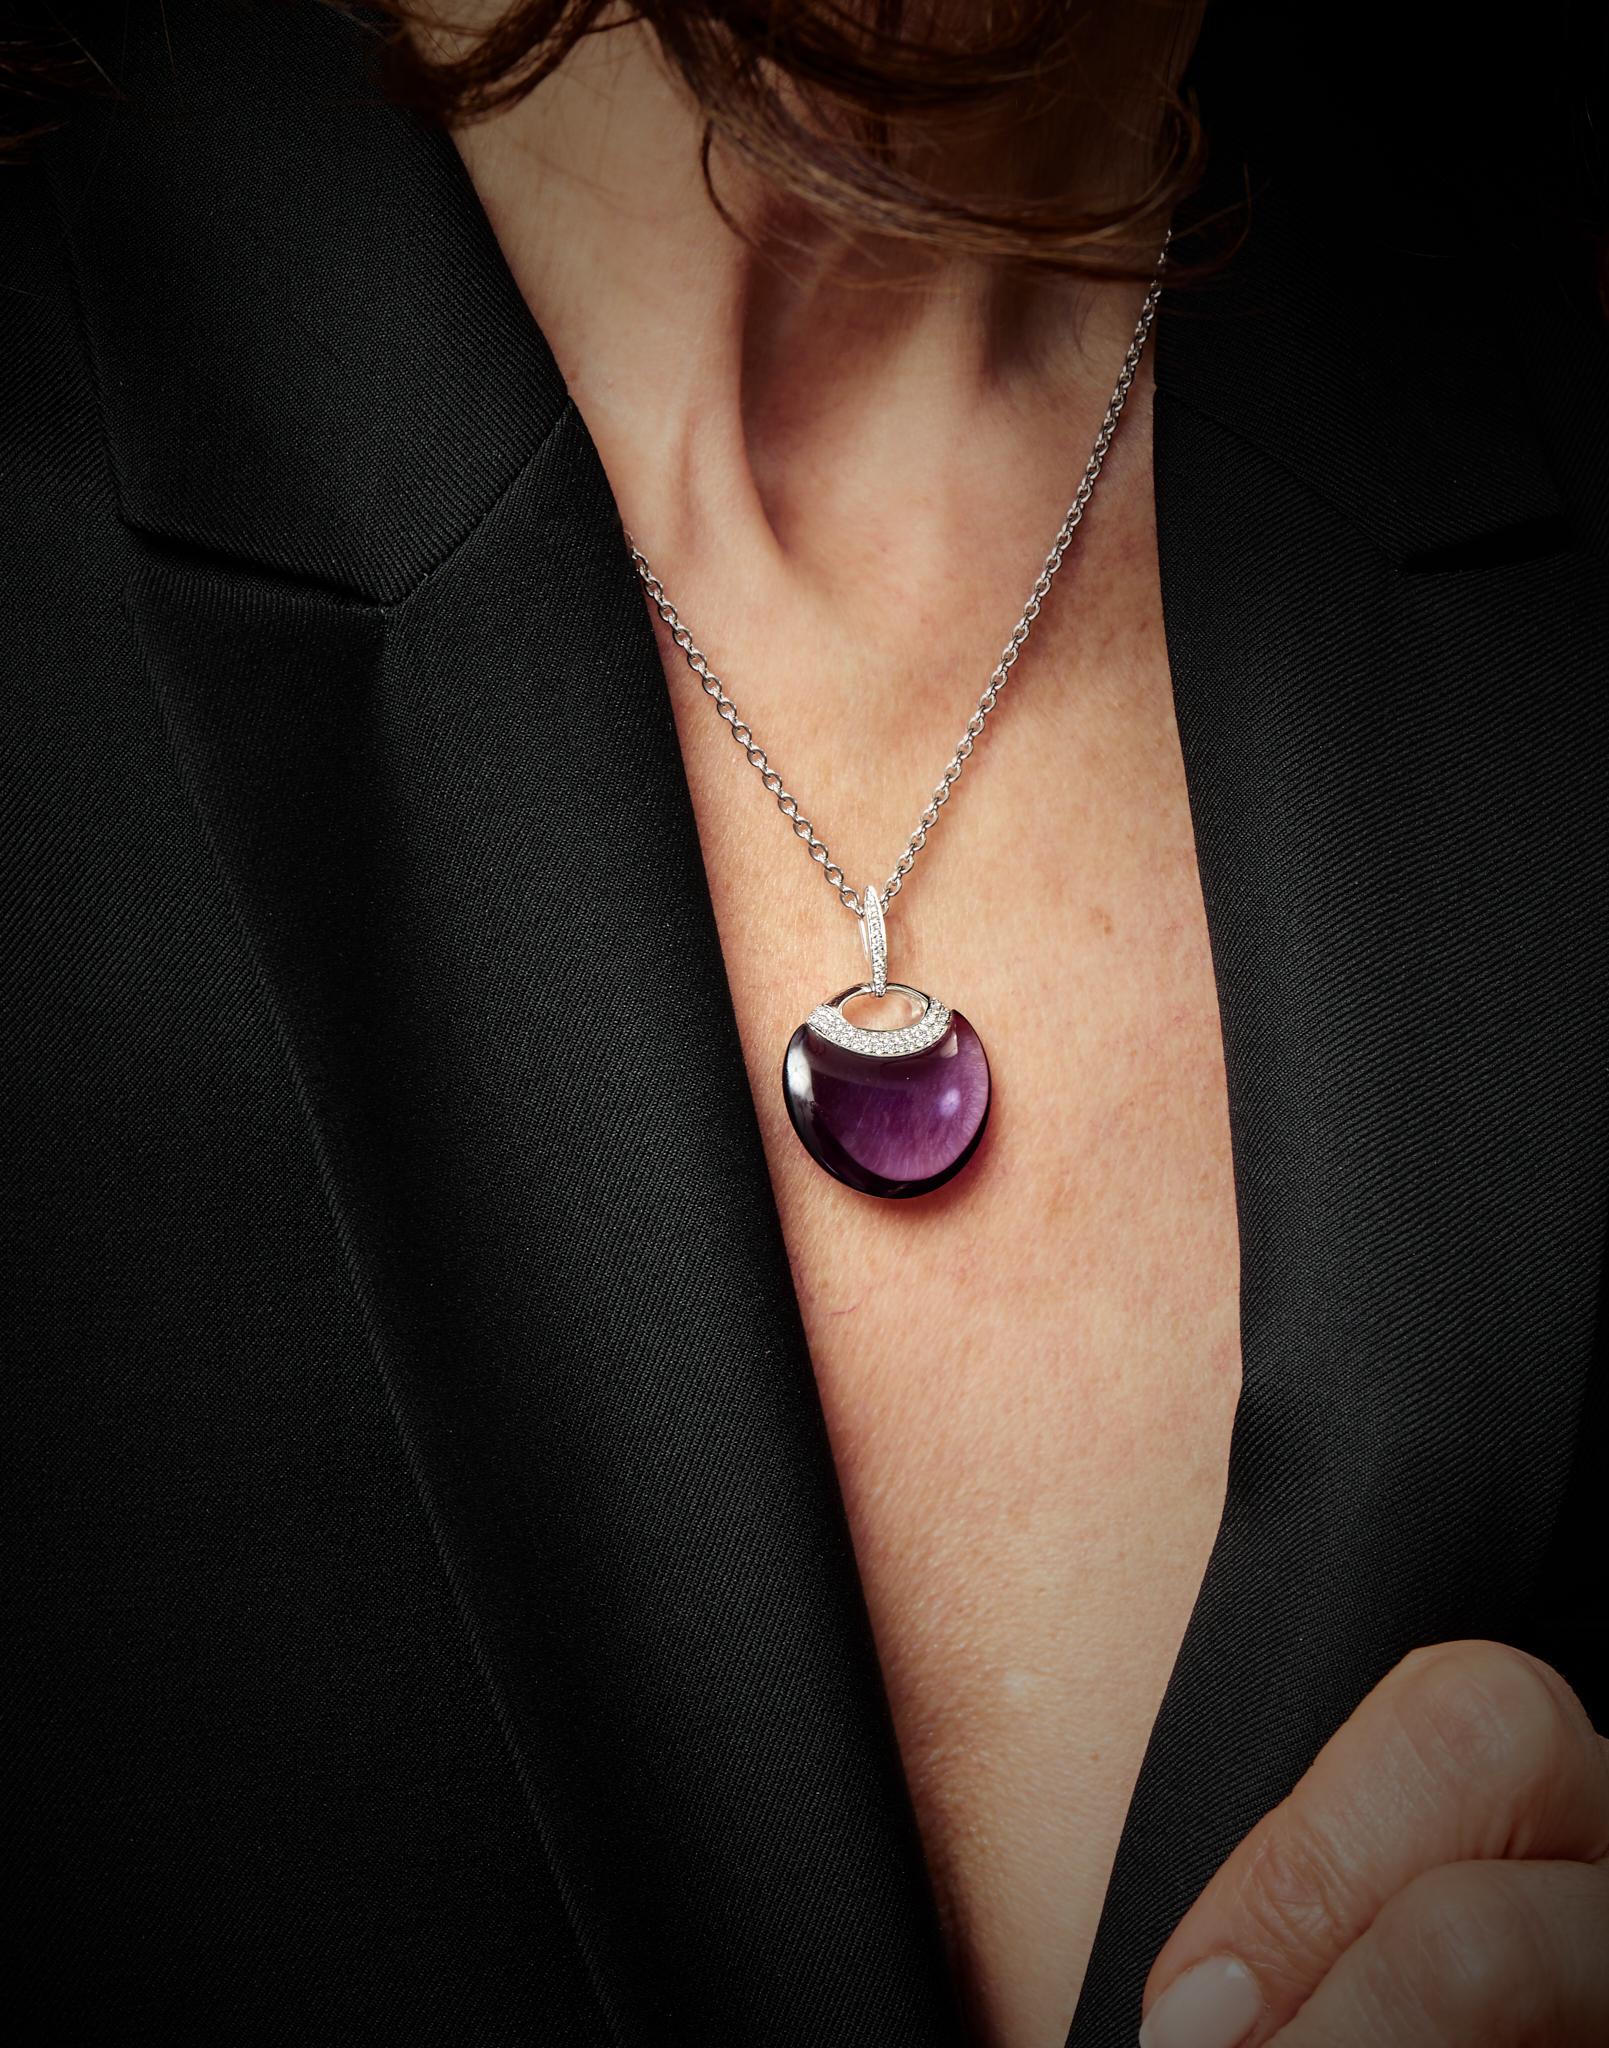 Designed by Eva Soussana, artist and founder of Hera-Jewellery, this exquisite 